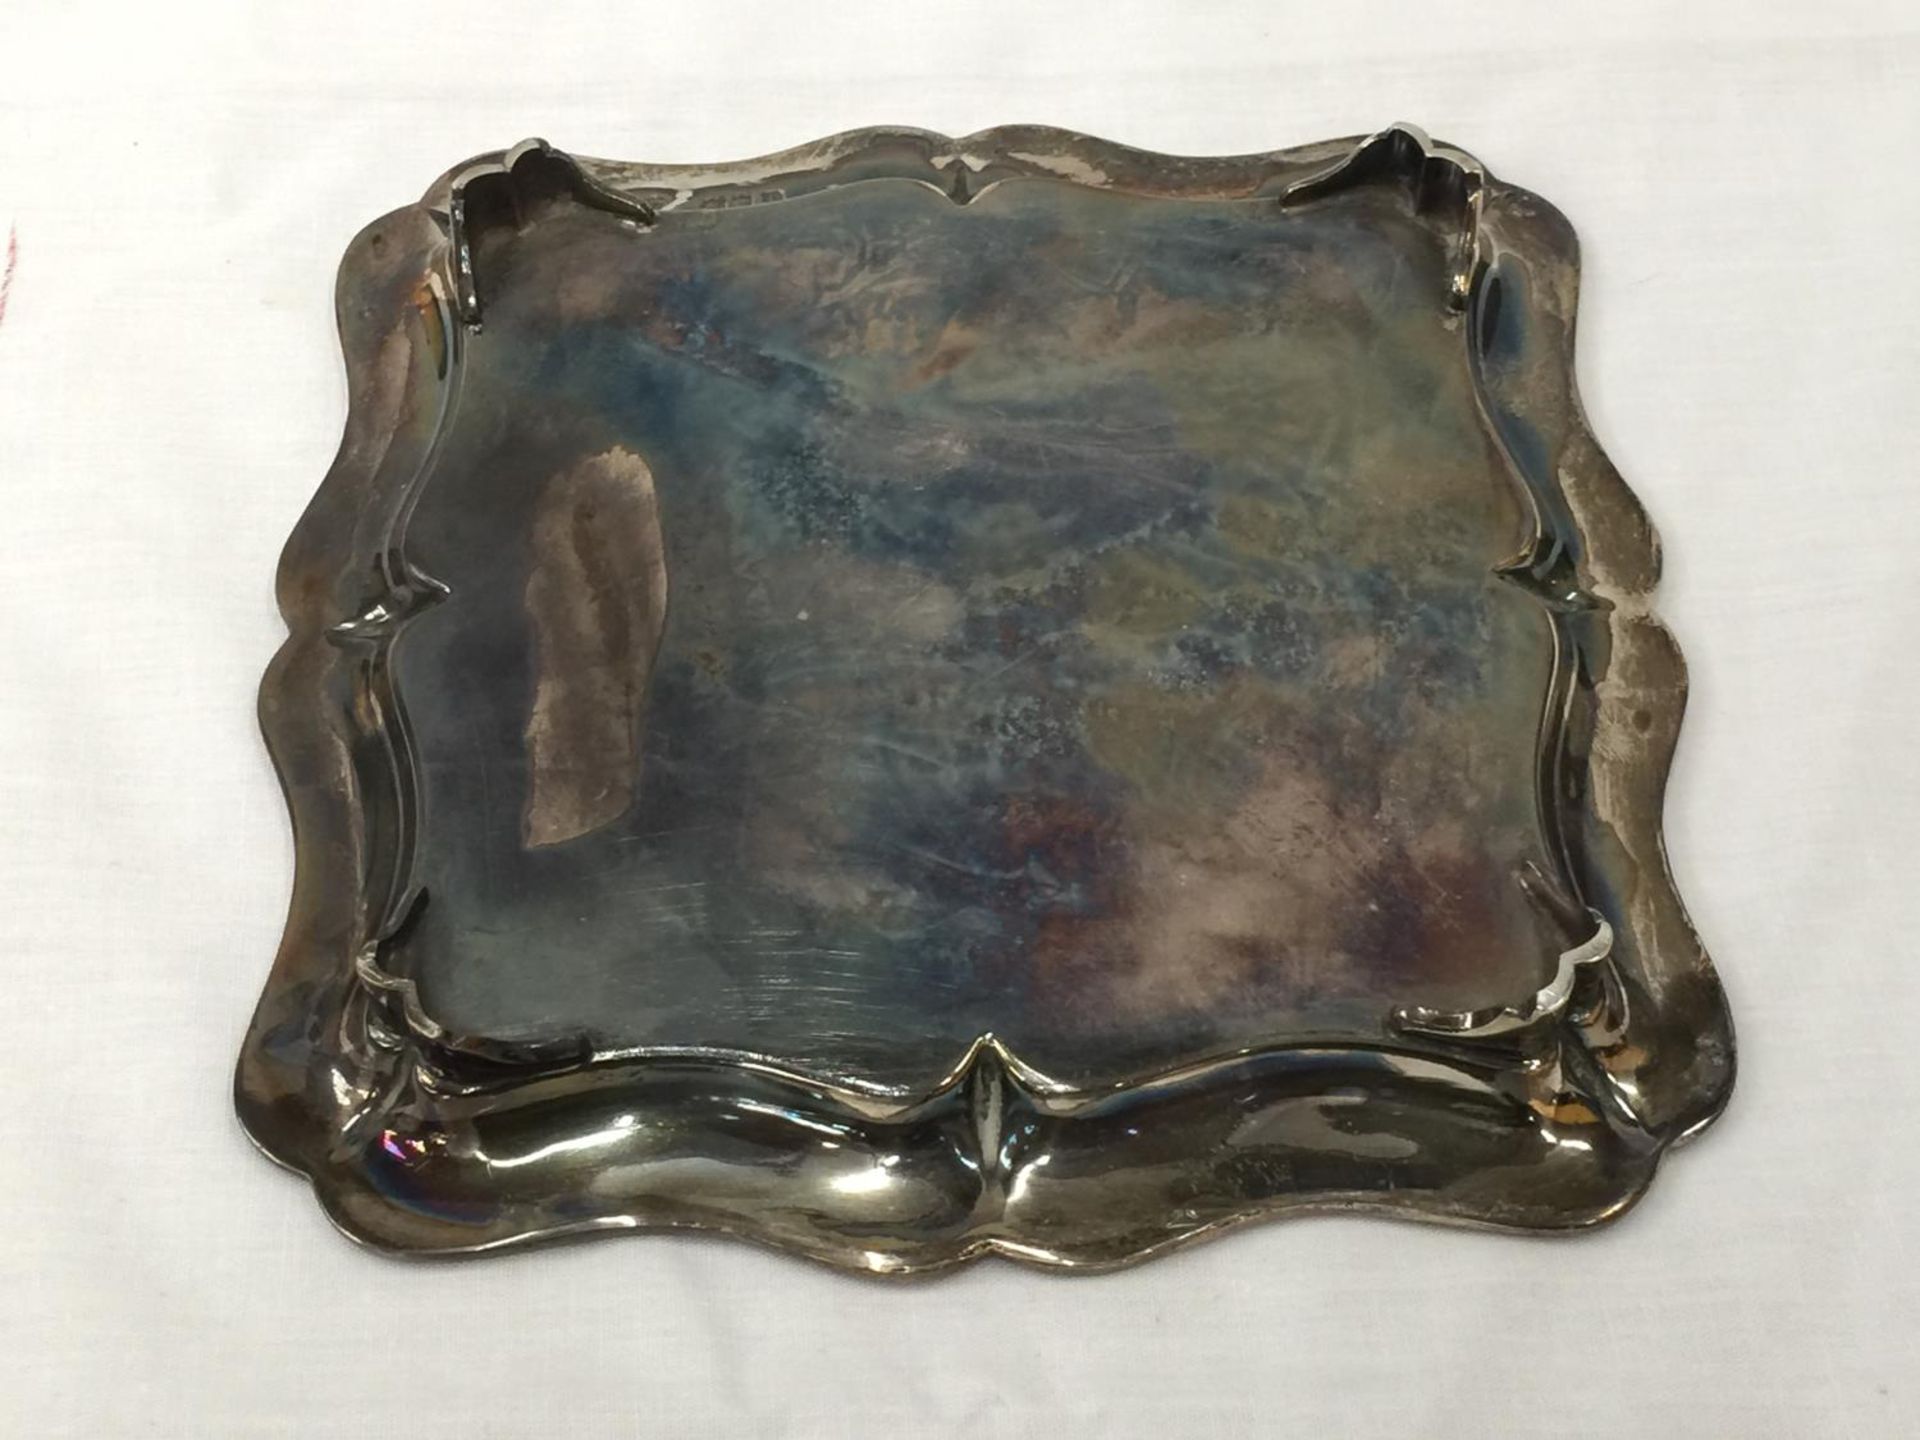 A LONDON HALLMARKED SILVER TRAY ON FEET. 18CM X 18CM. WEIGHT 295 GRAMS - Image 9 of 10